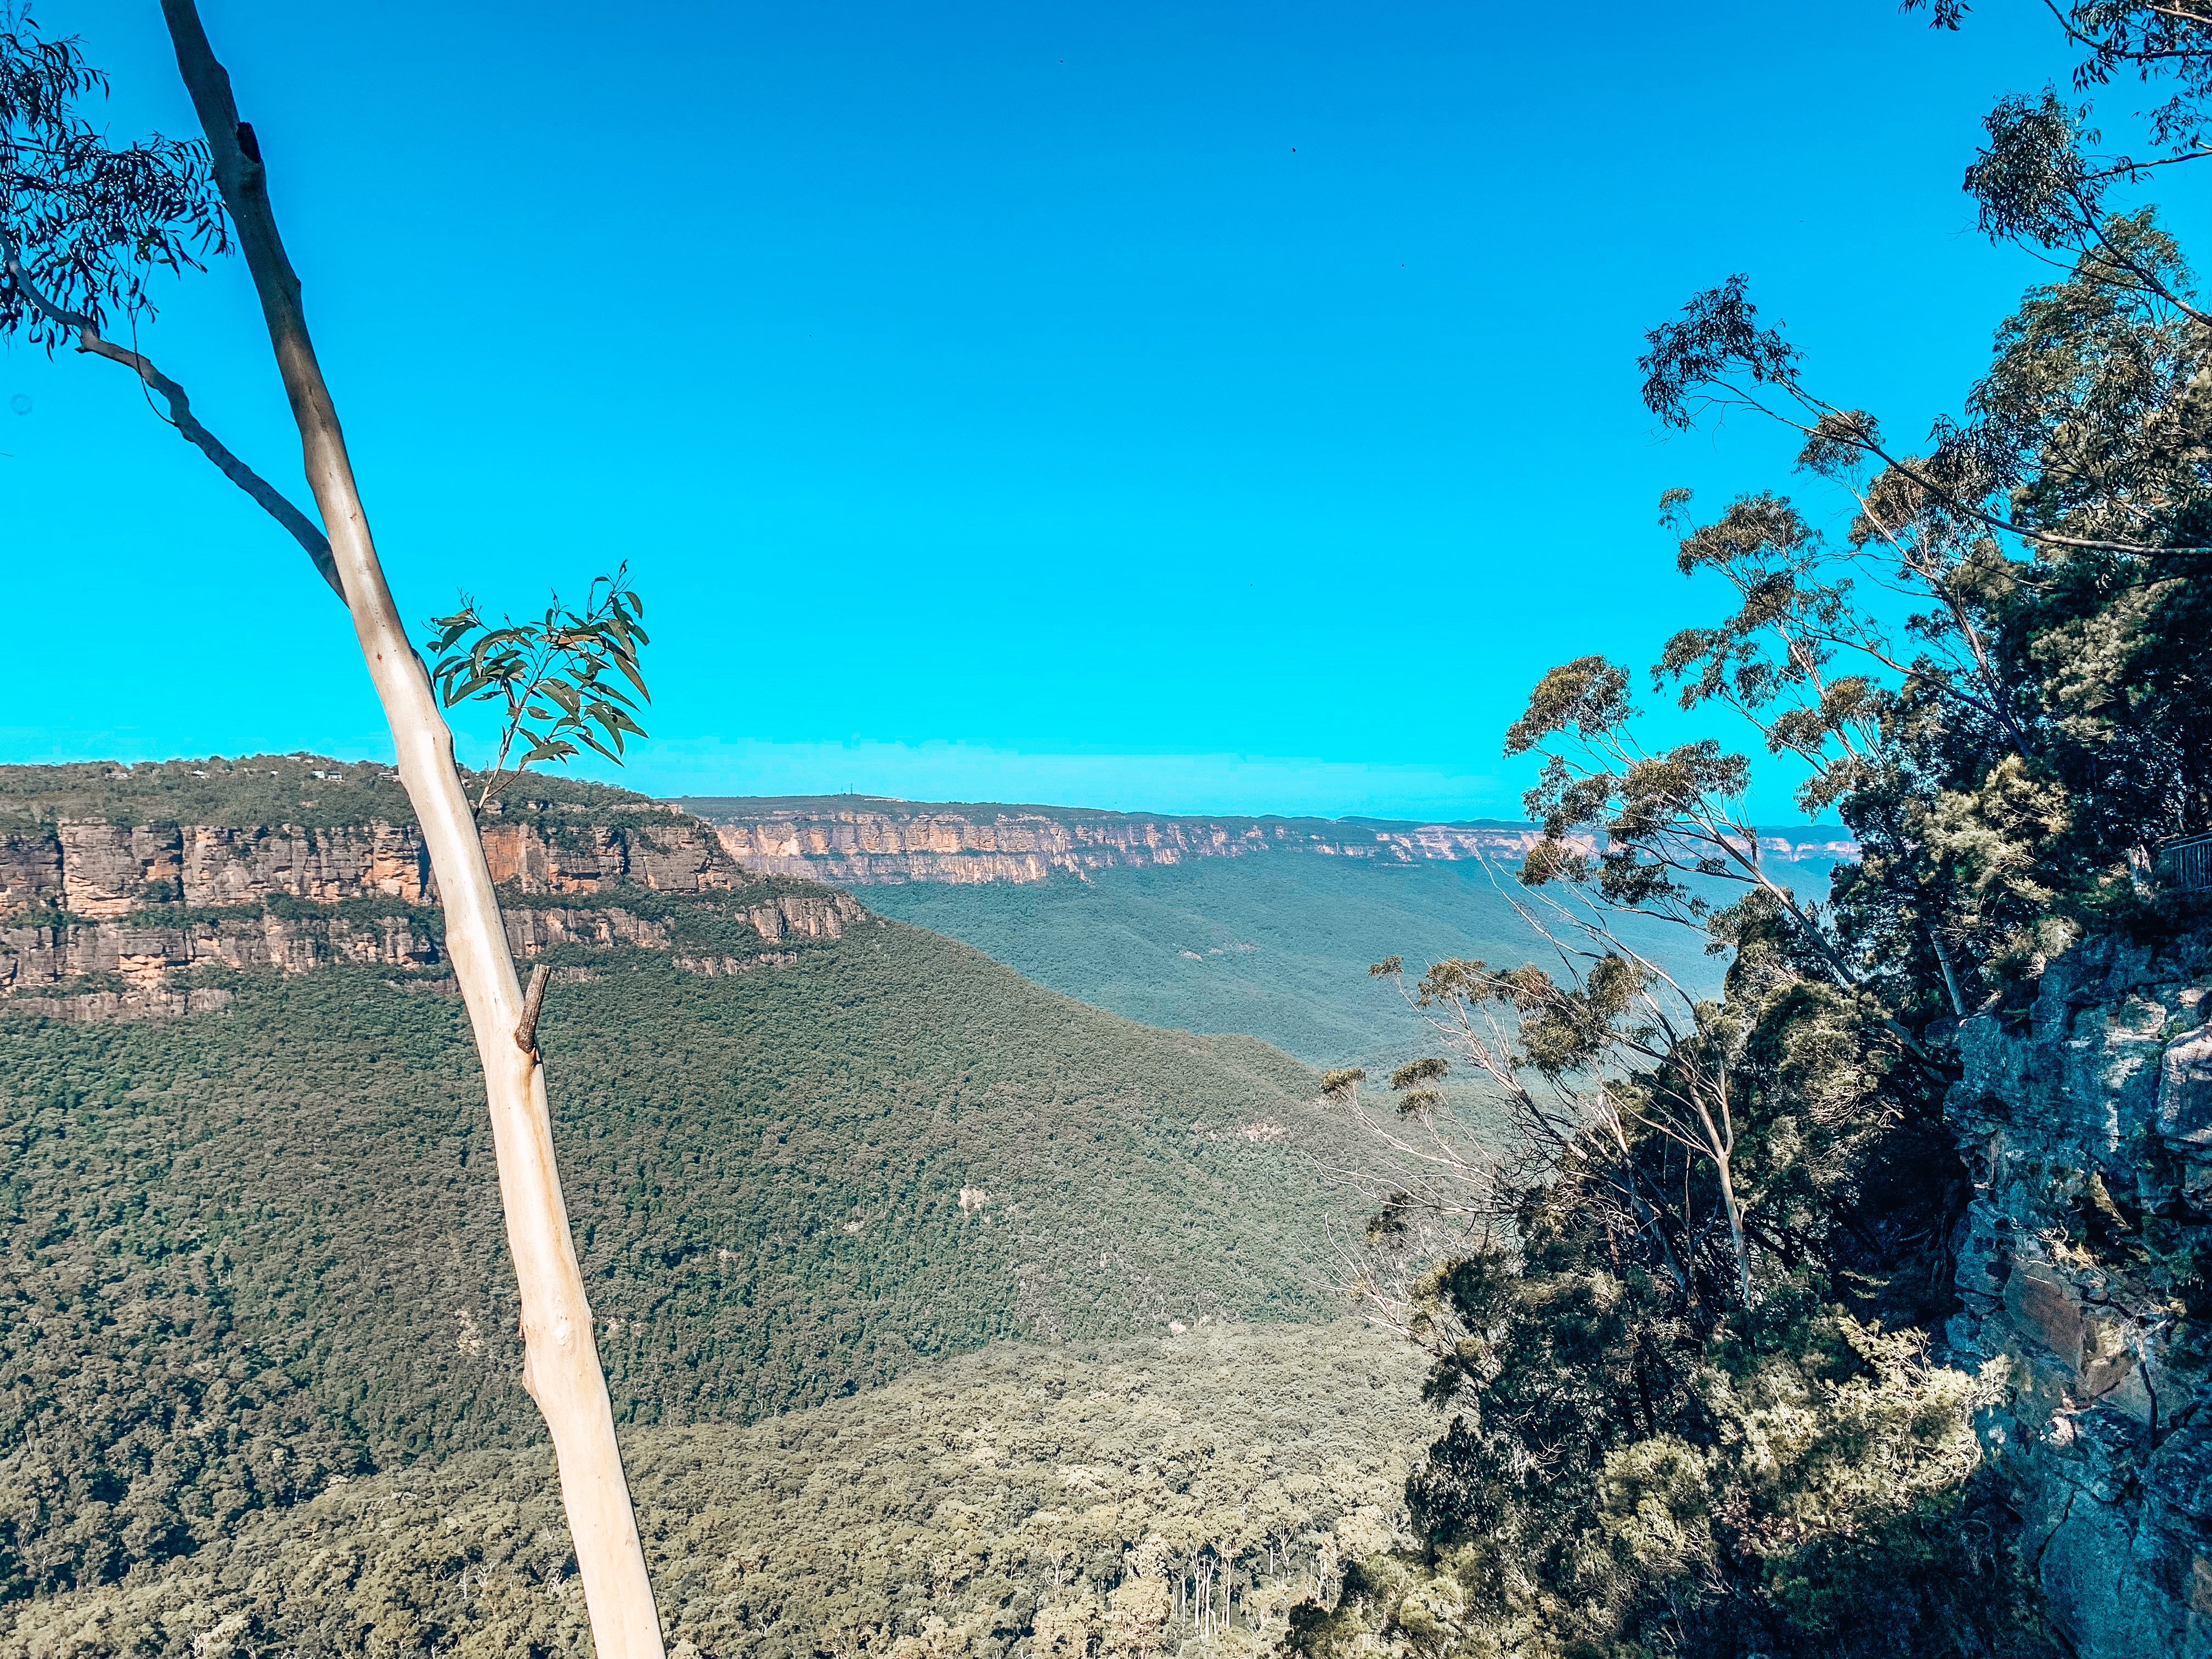 Honeymoon Lookout over Blue Mountains, Sydney